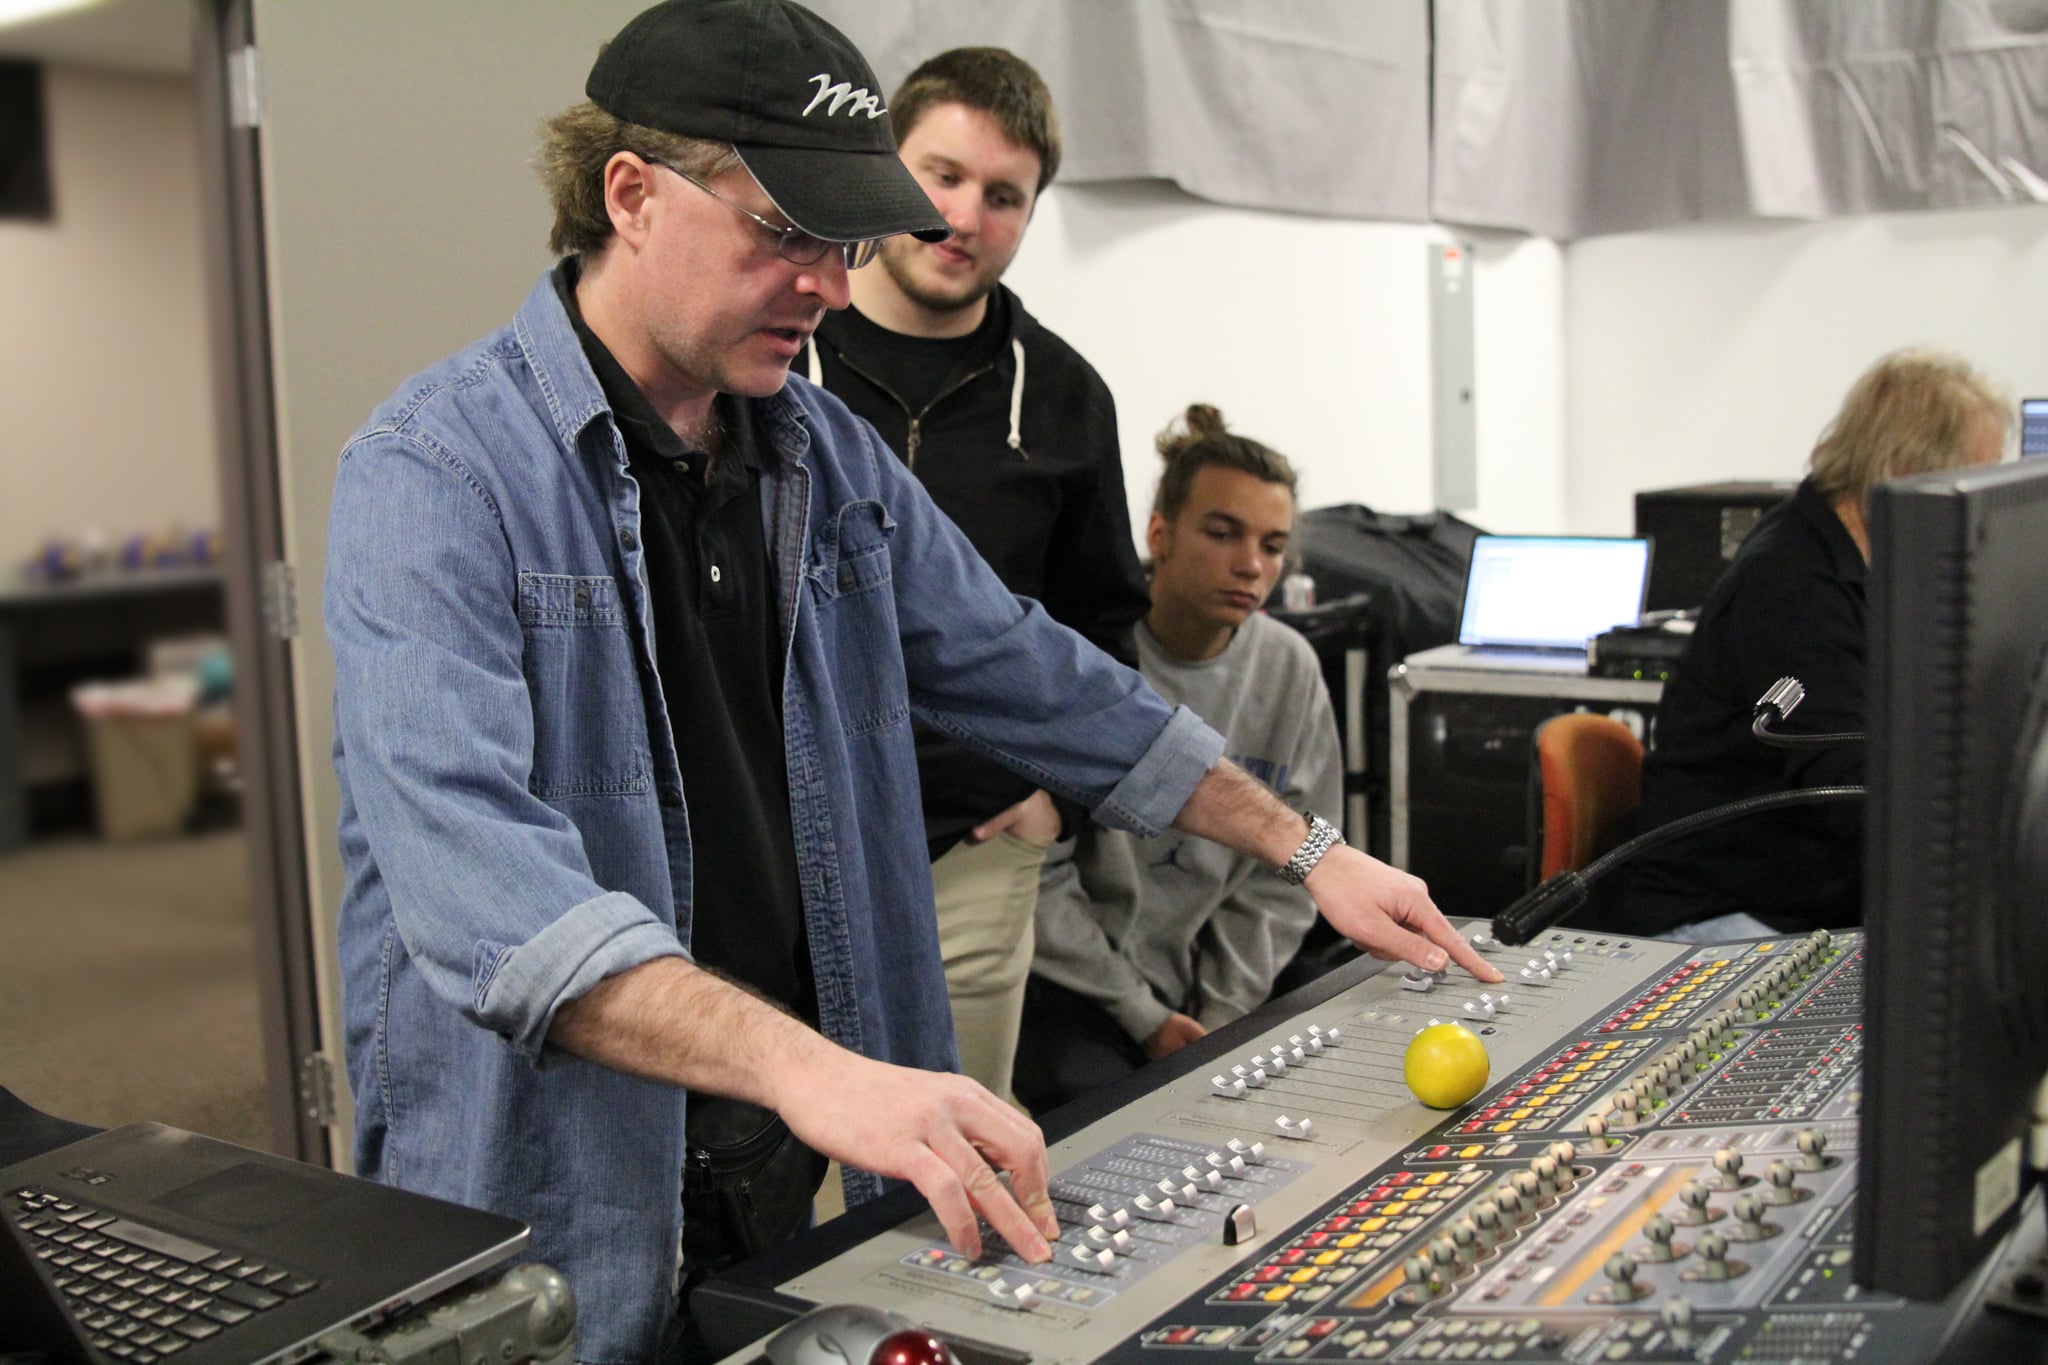 Brian Persall, Guest Engineer